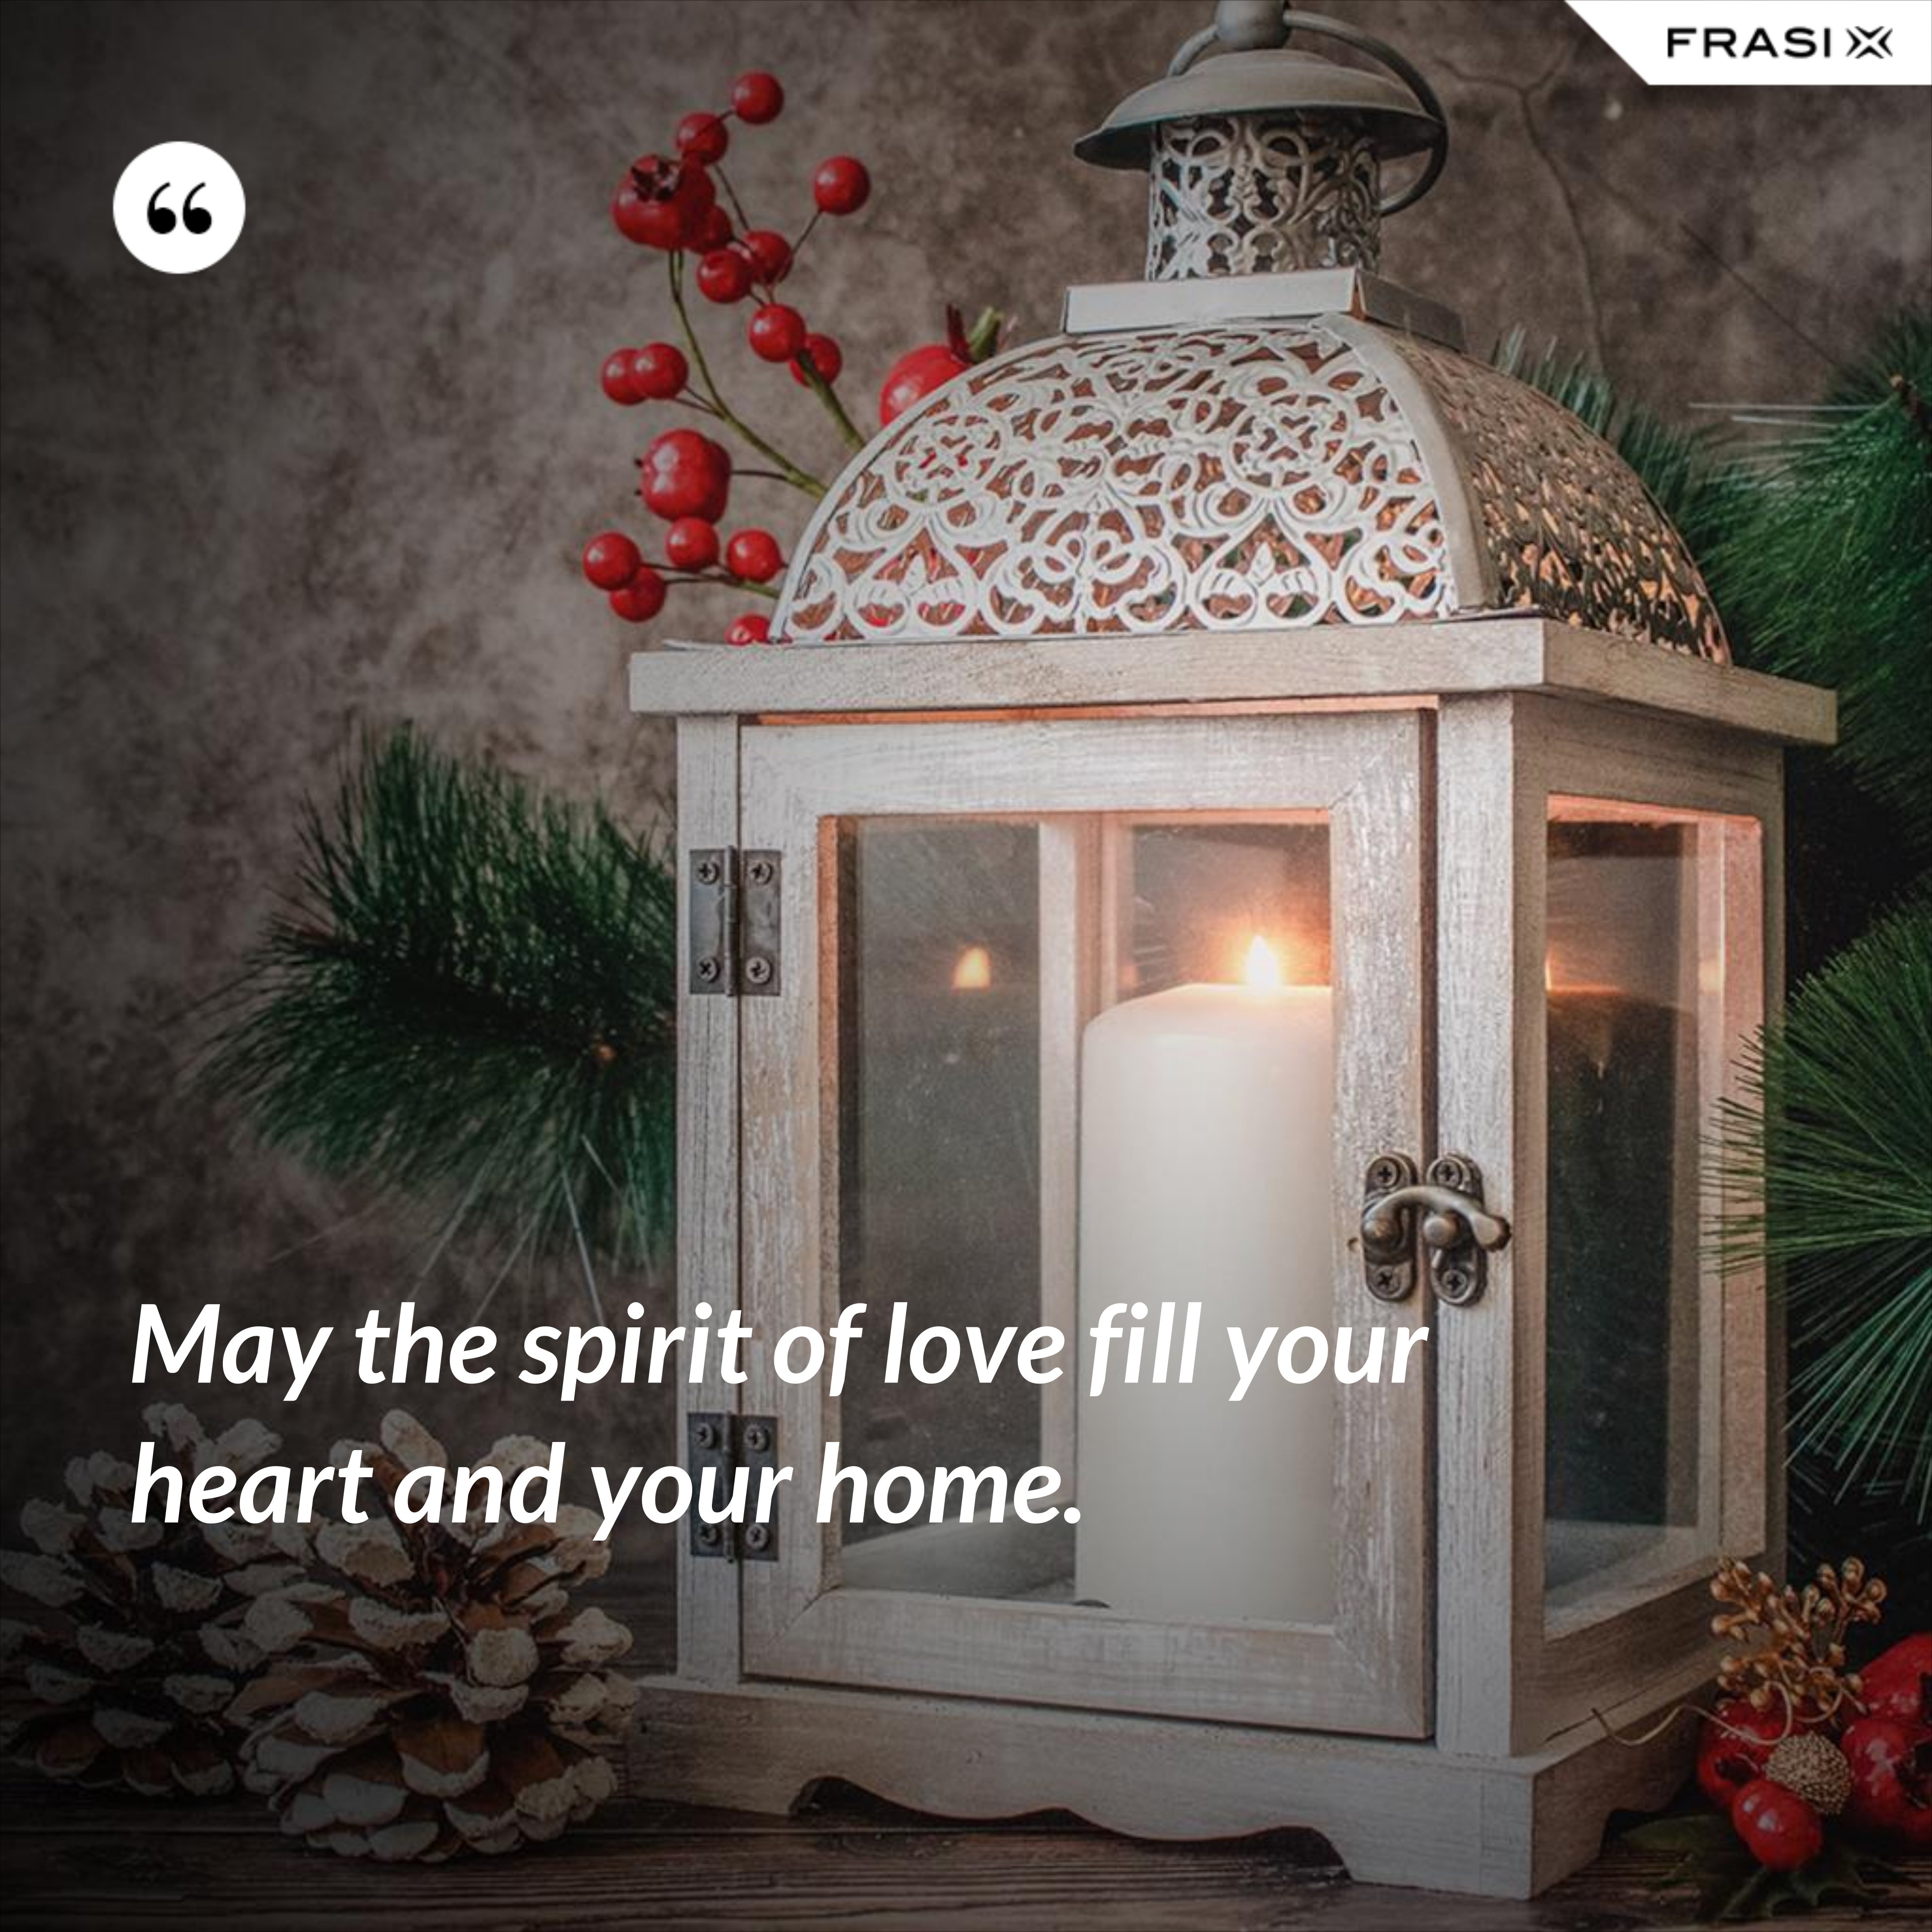 May the spirit of love fill your heart and your home. - Anonimo